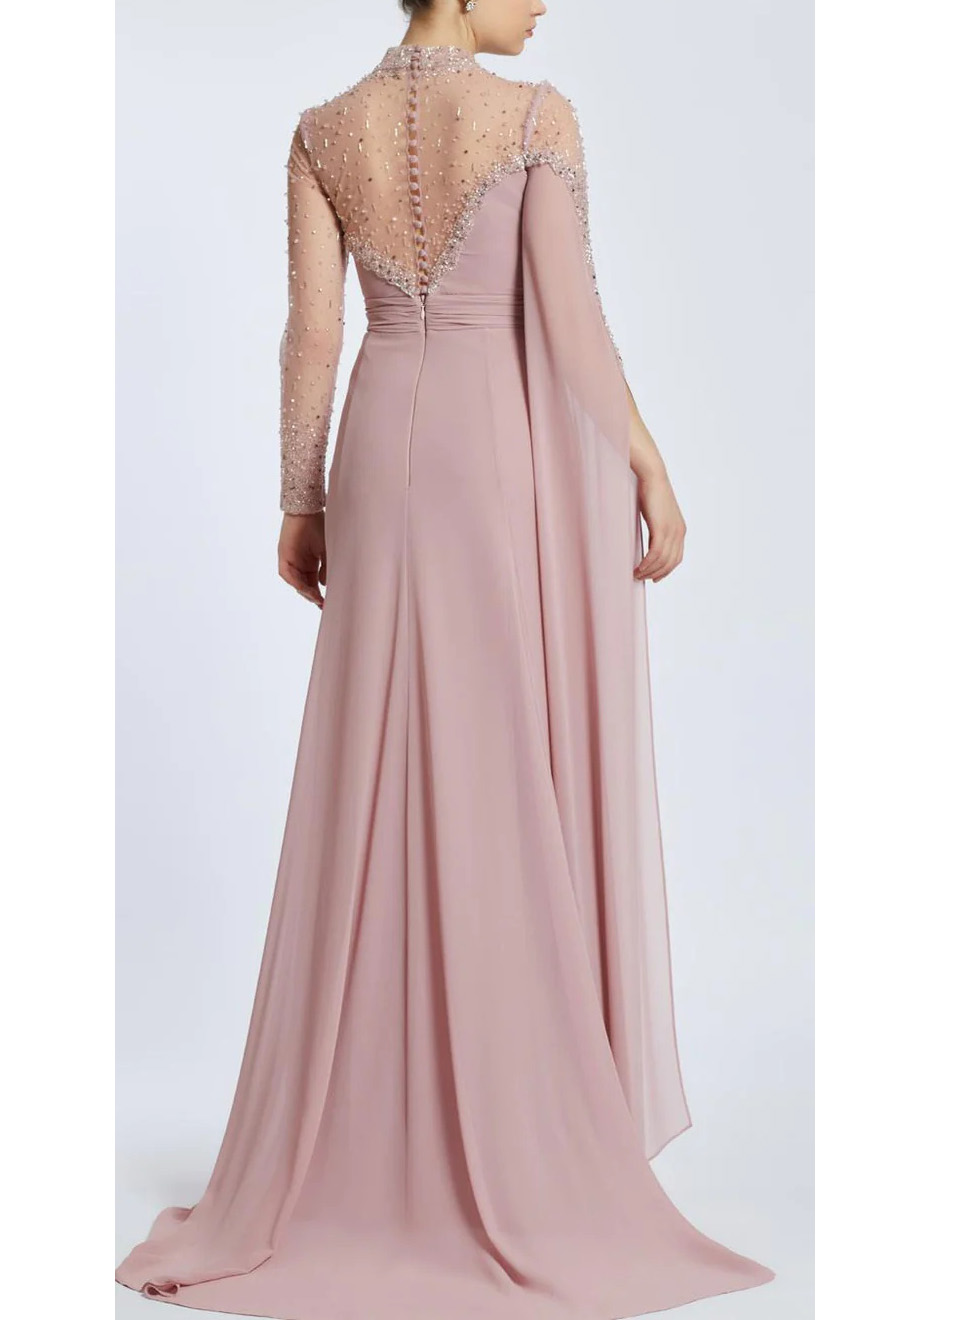 Sparkly Long Sleeves Column Chiffon Evening Dresses With Beading